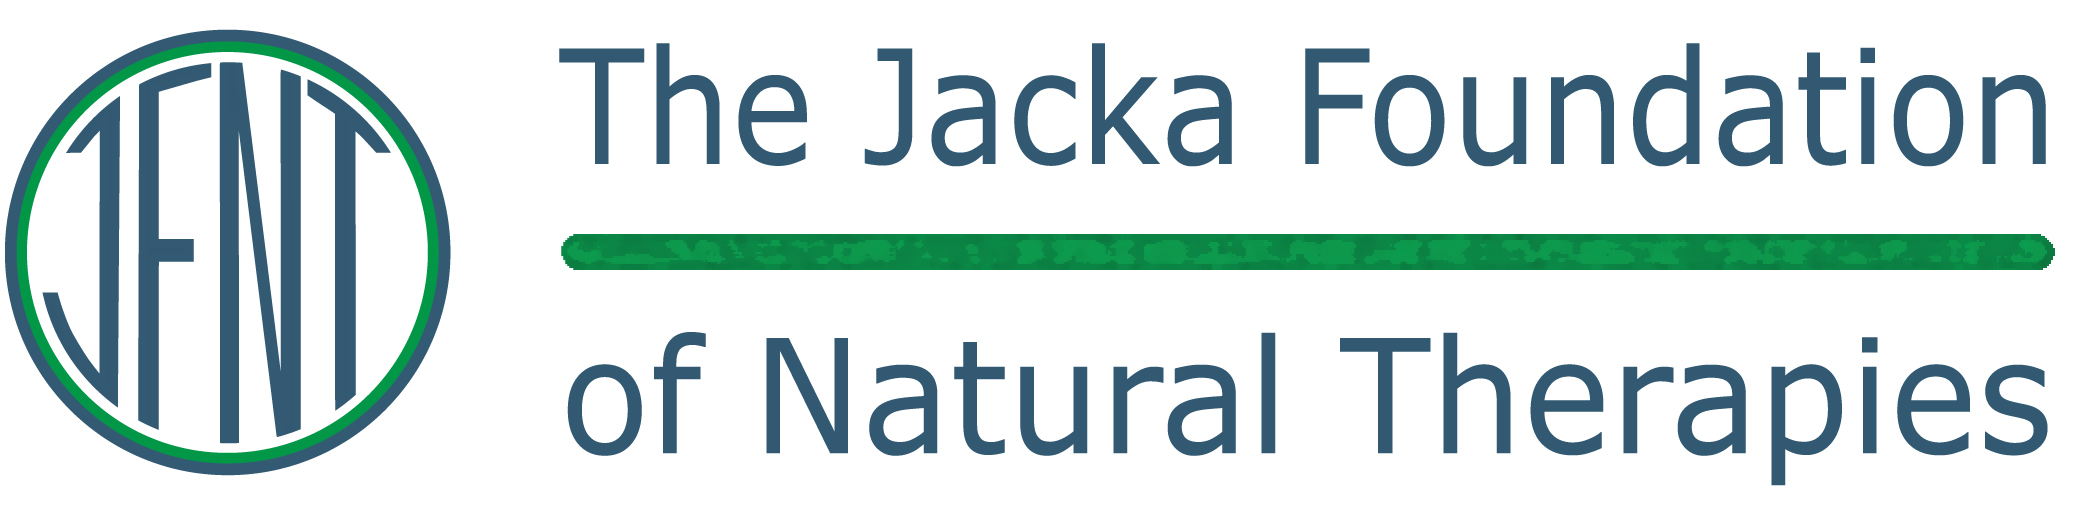 The Jacka Foundation of Natural Therapies Ltd logo